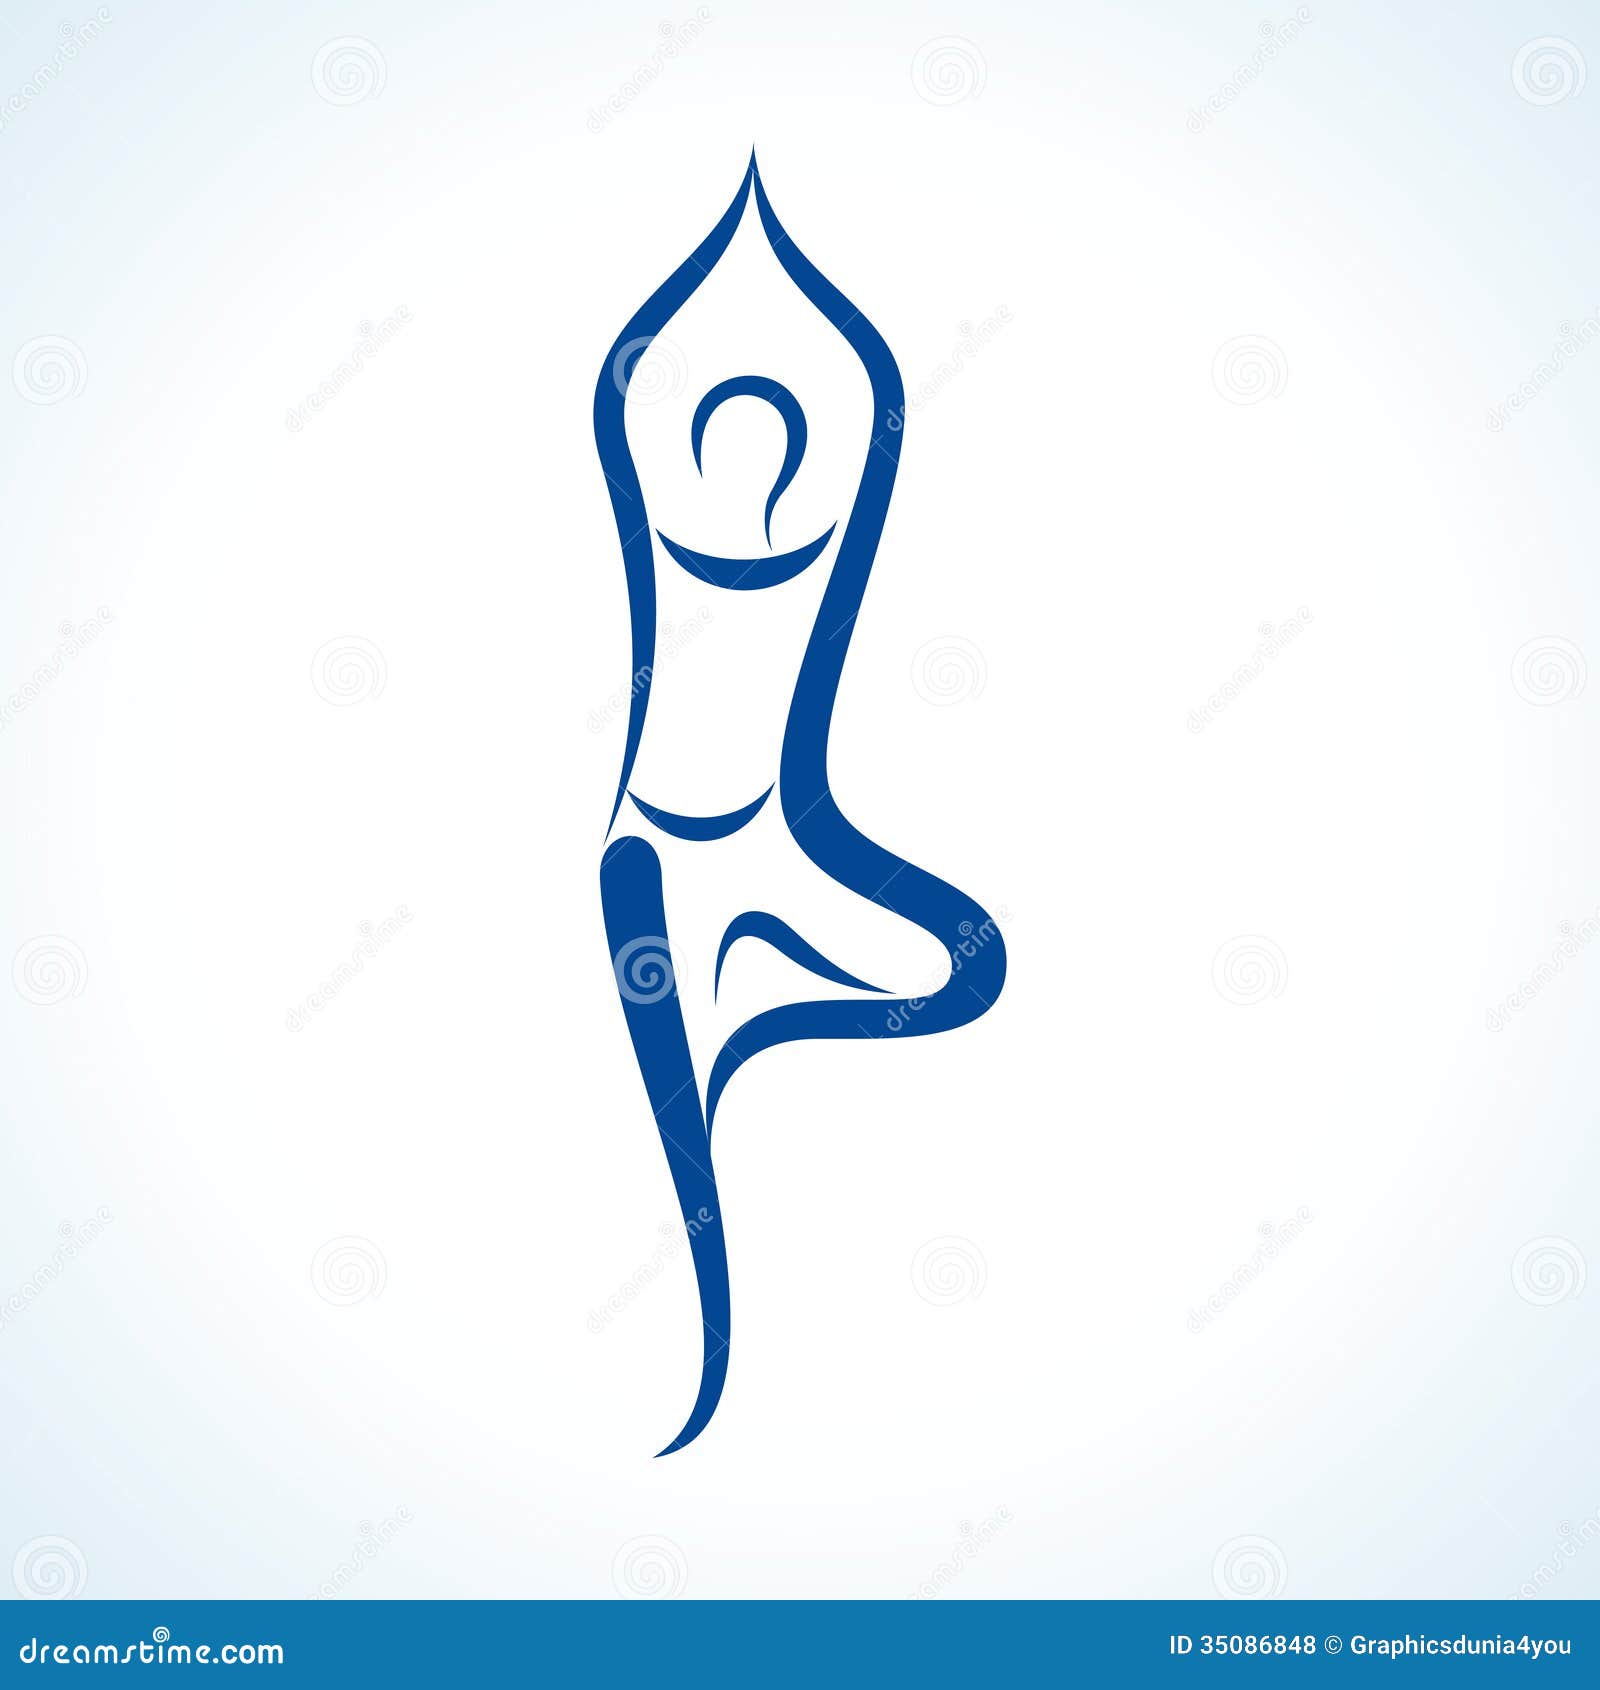 clipart of yoga poses - photo #23